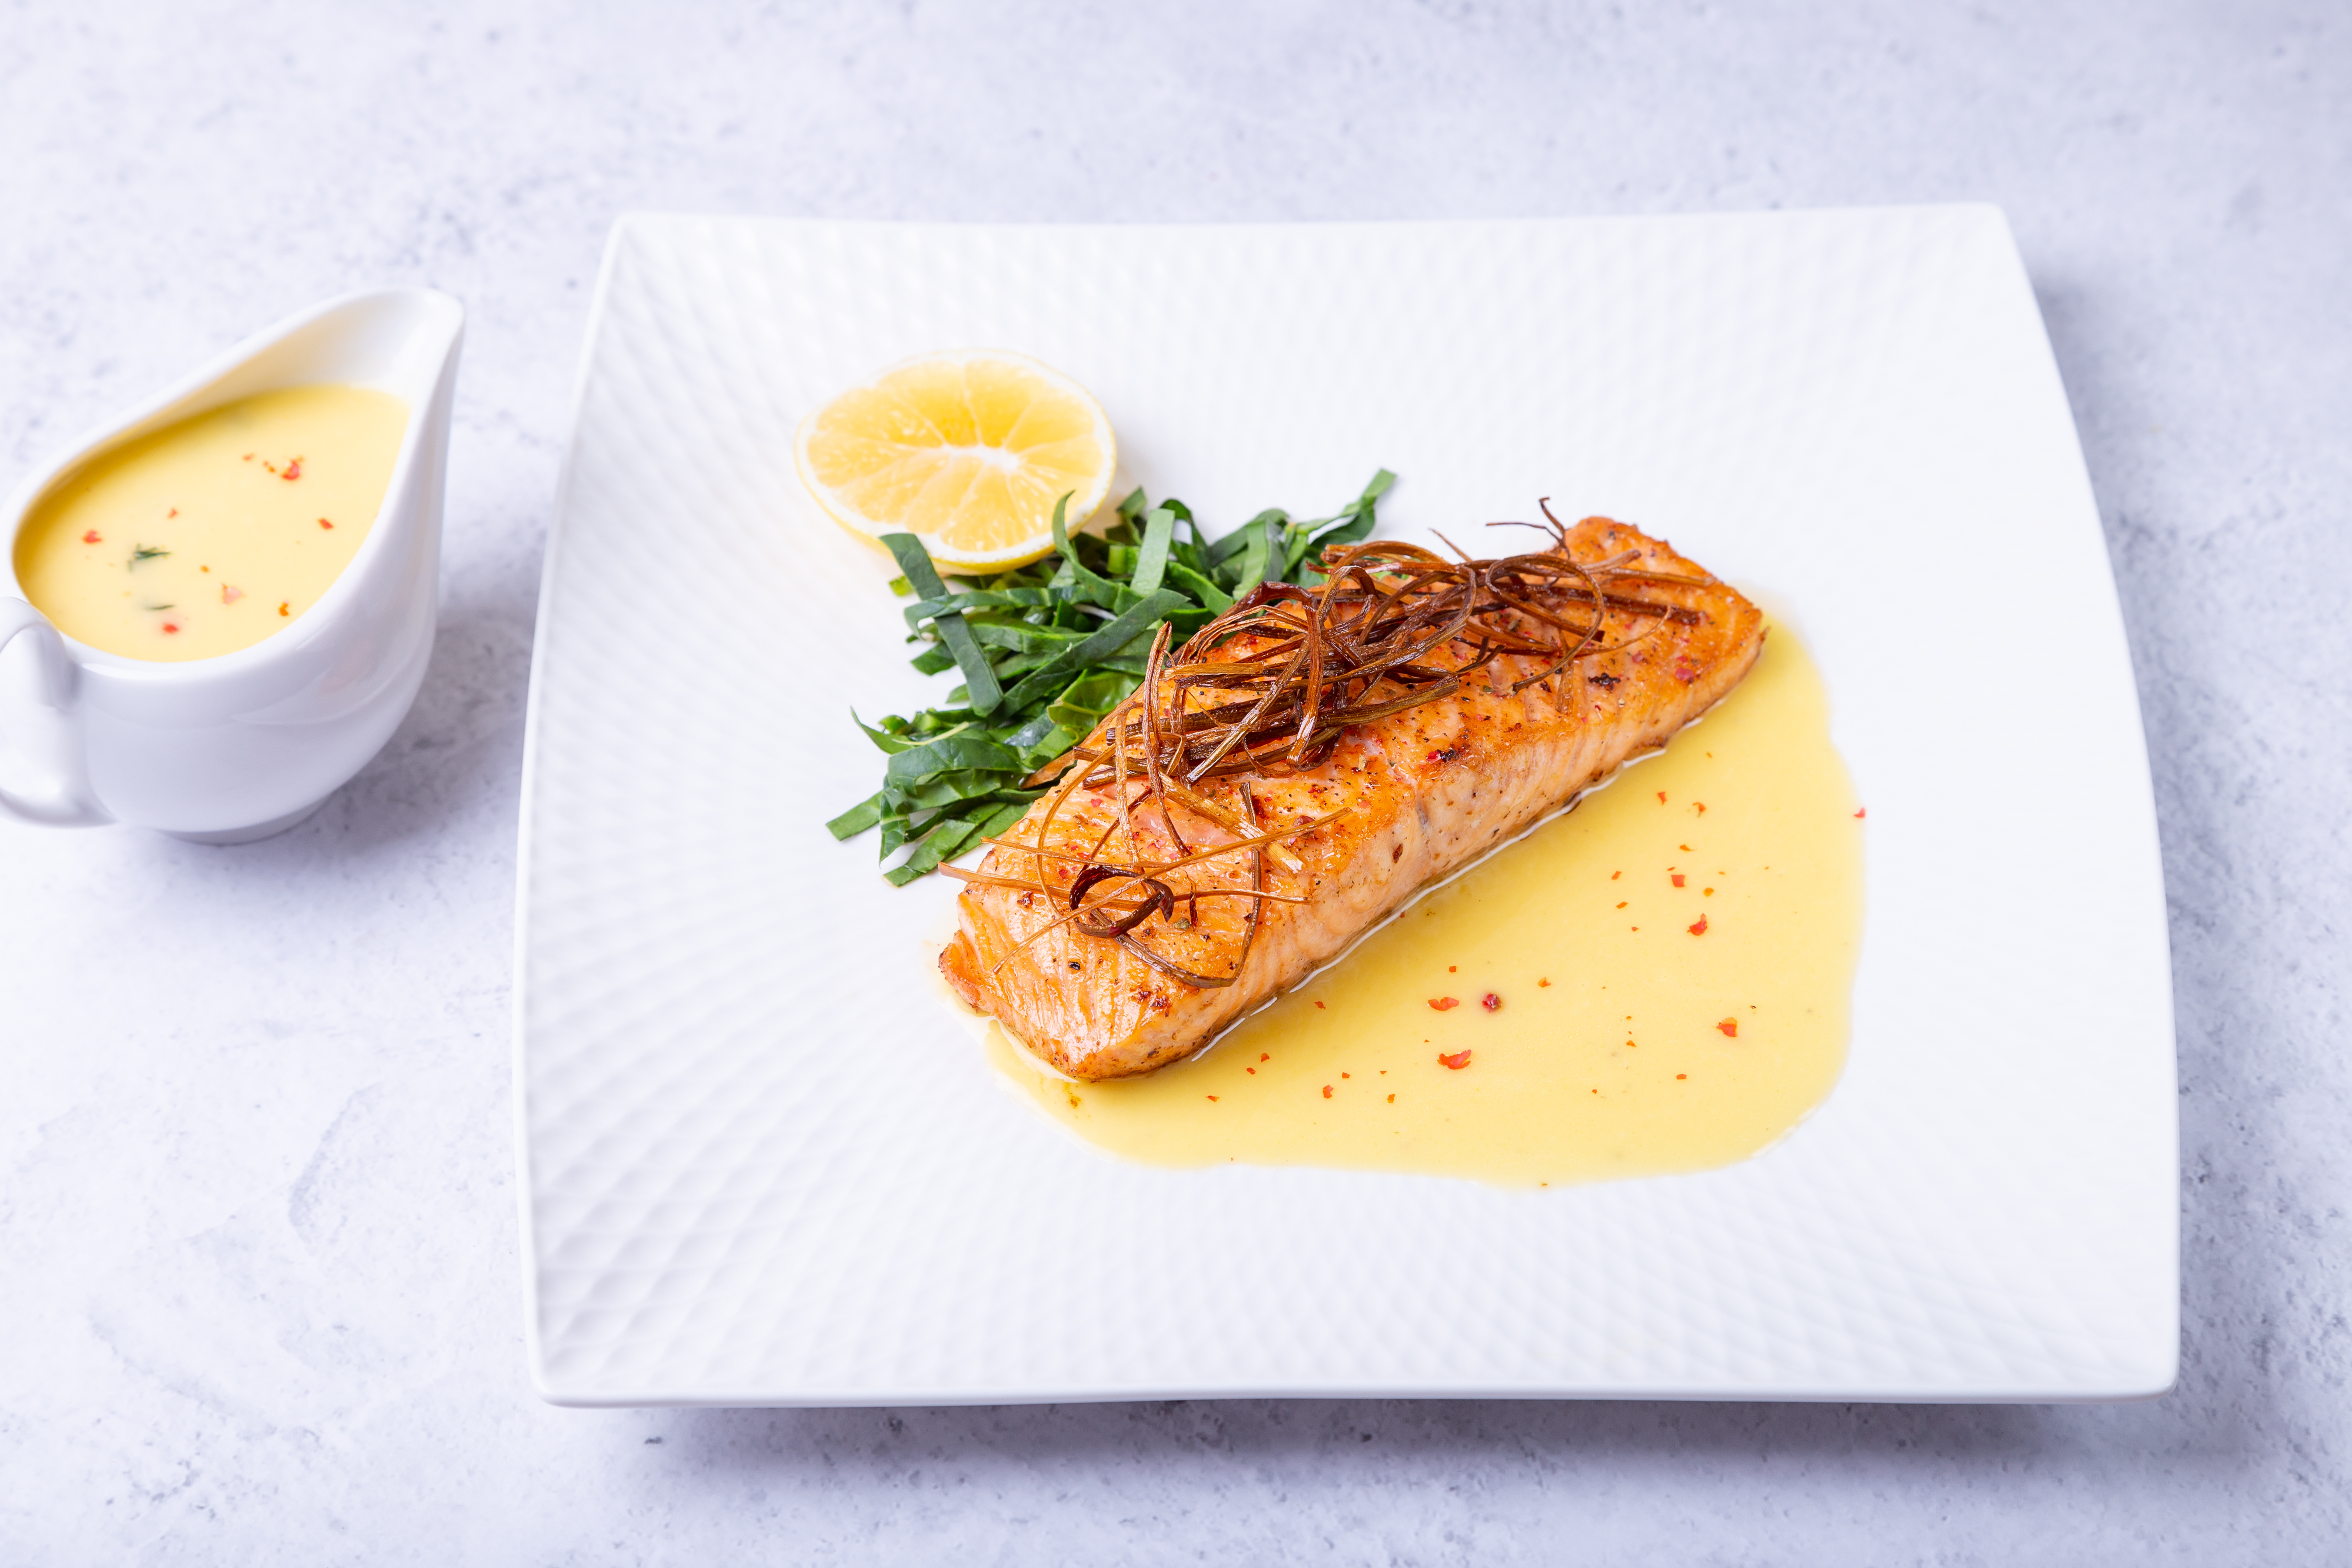 salmon-with-beurre-blanc-sauce-spinach-lemon-garnished-with-leeks-french-dish